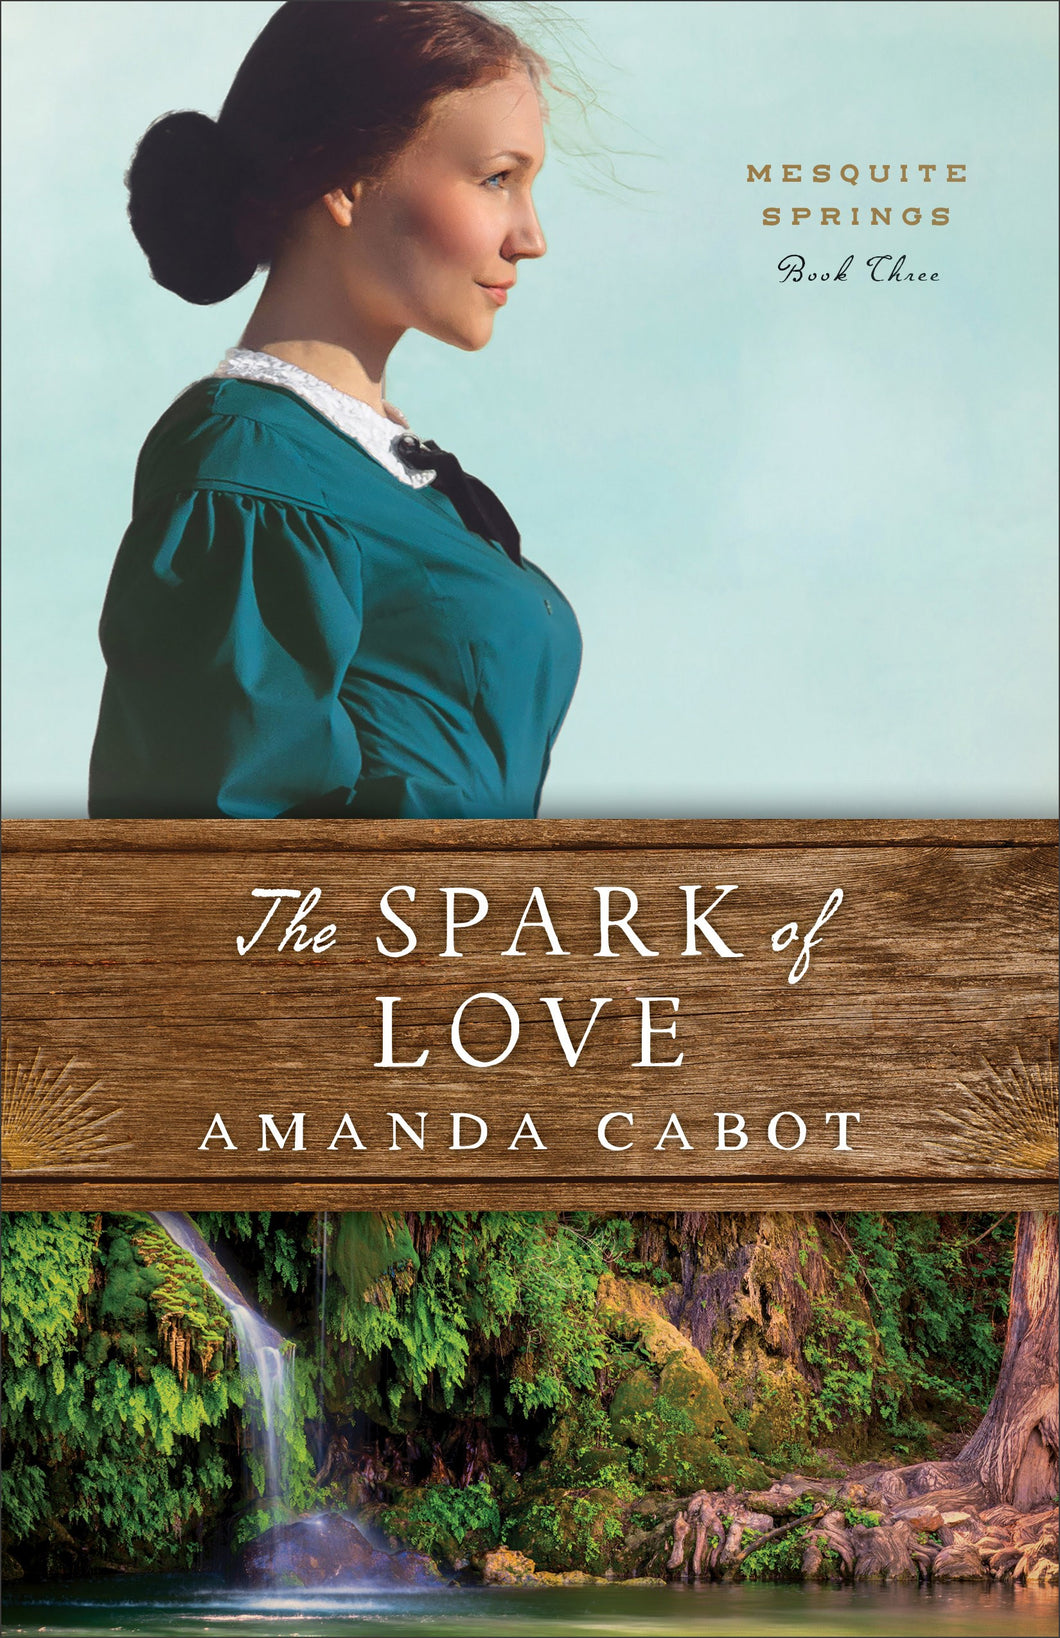 The Spark of Love (Mesquite Springs #3)